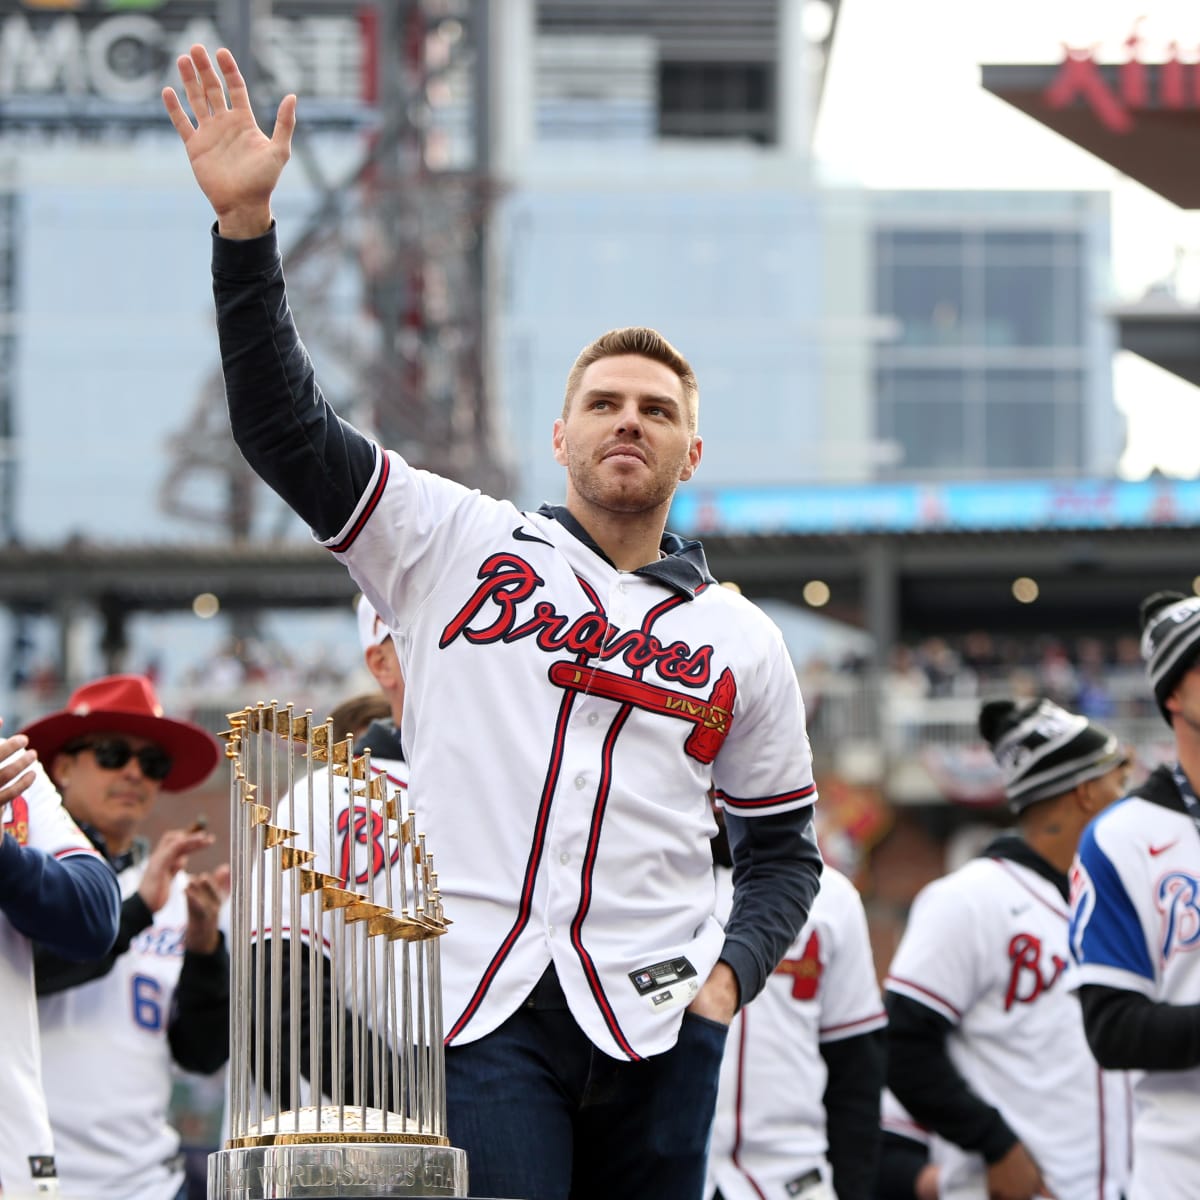 Should Braves Be Concerned About Freddie Freeman's Elbow?